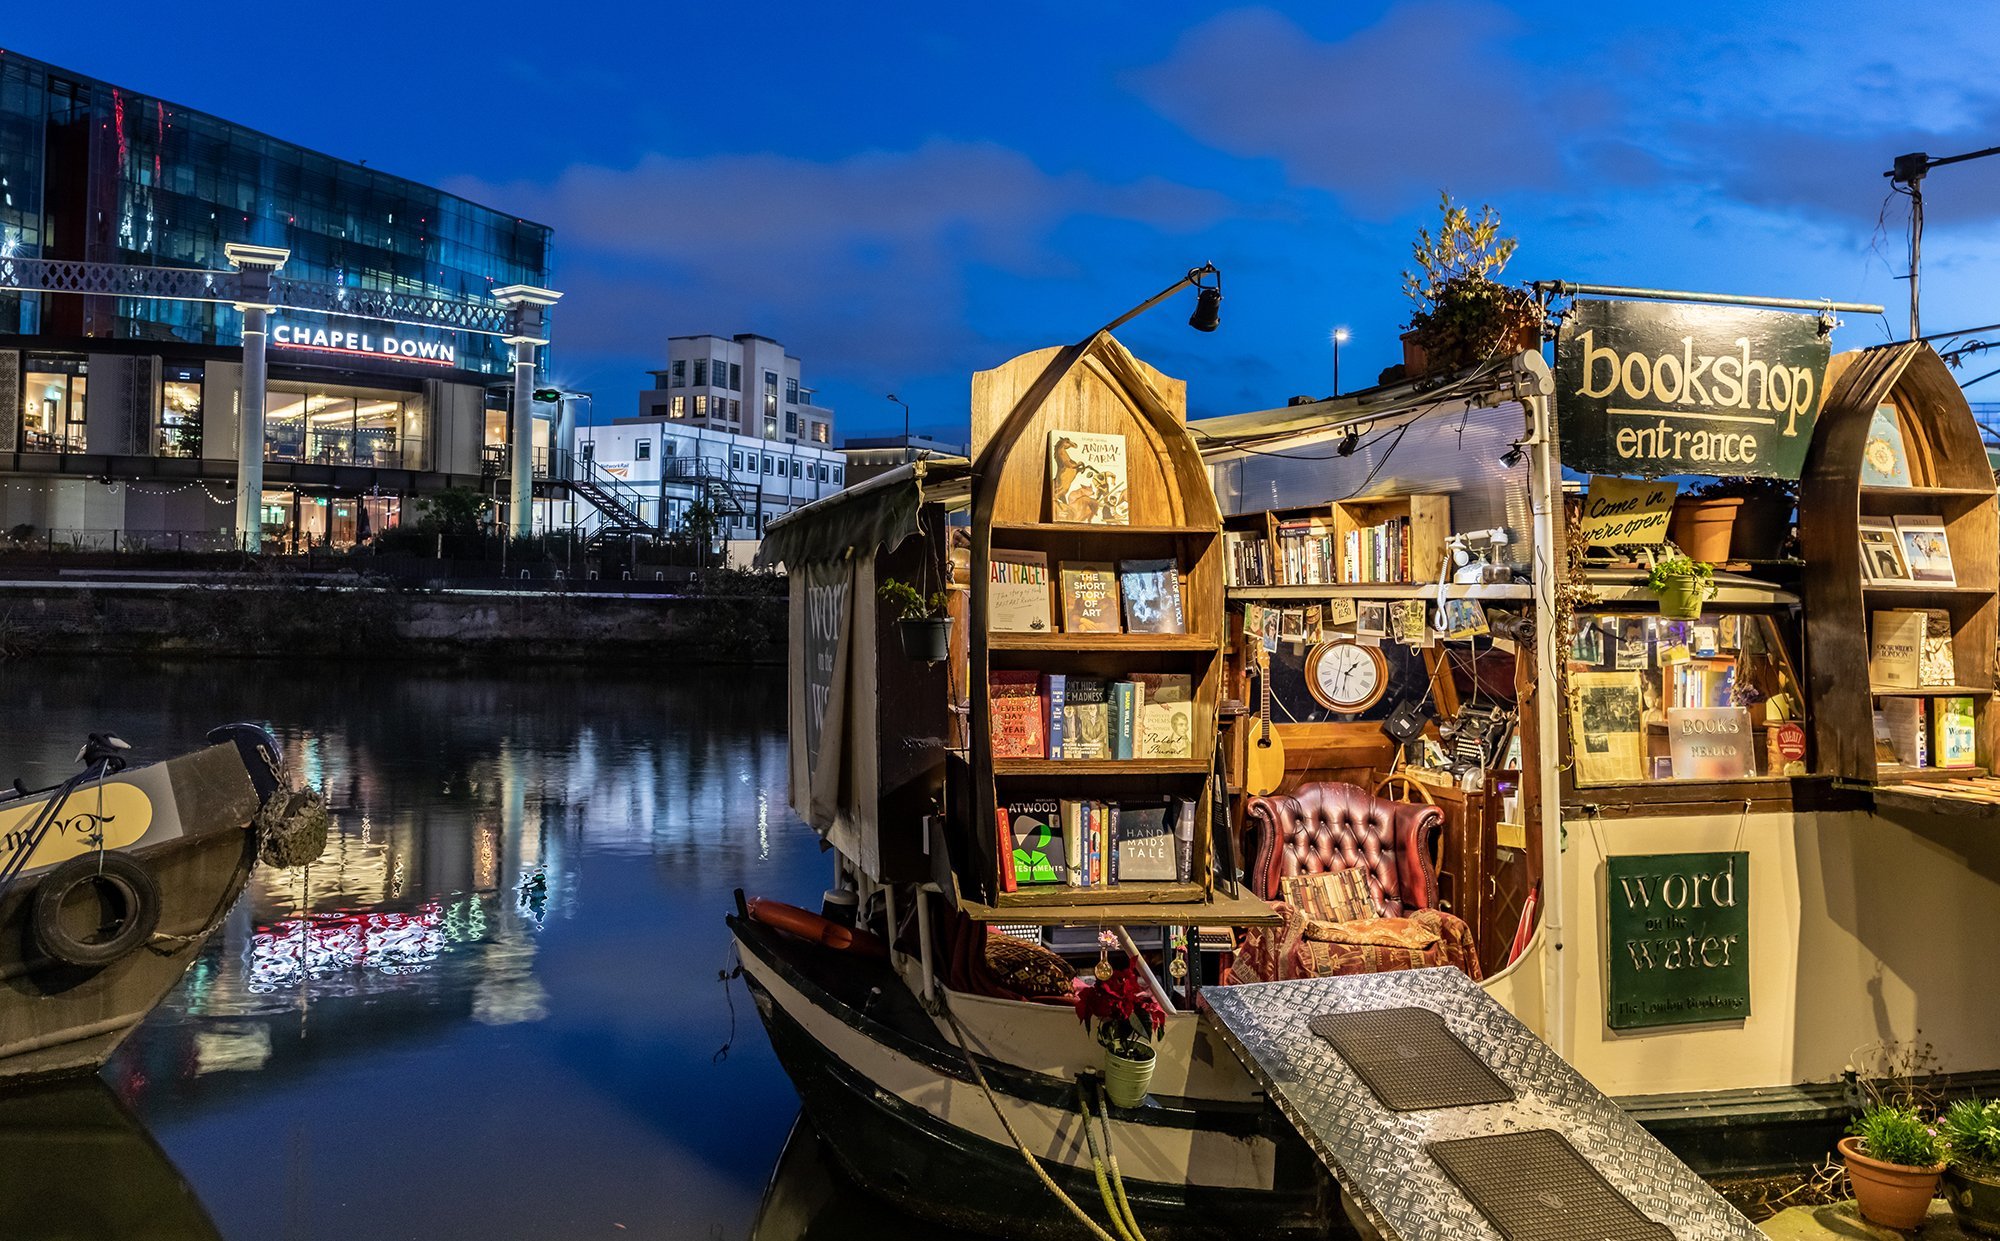 1. Word On The Water - The London Bookbarge